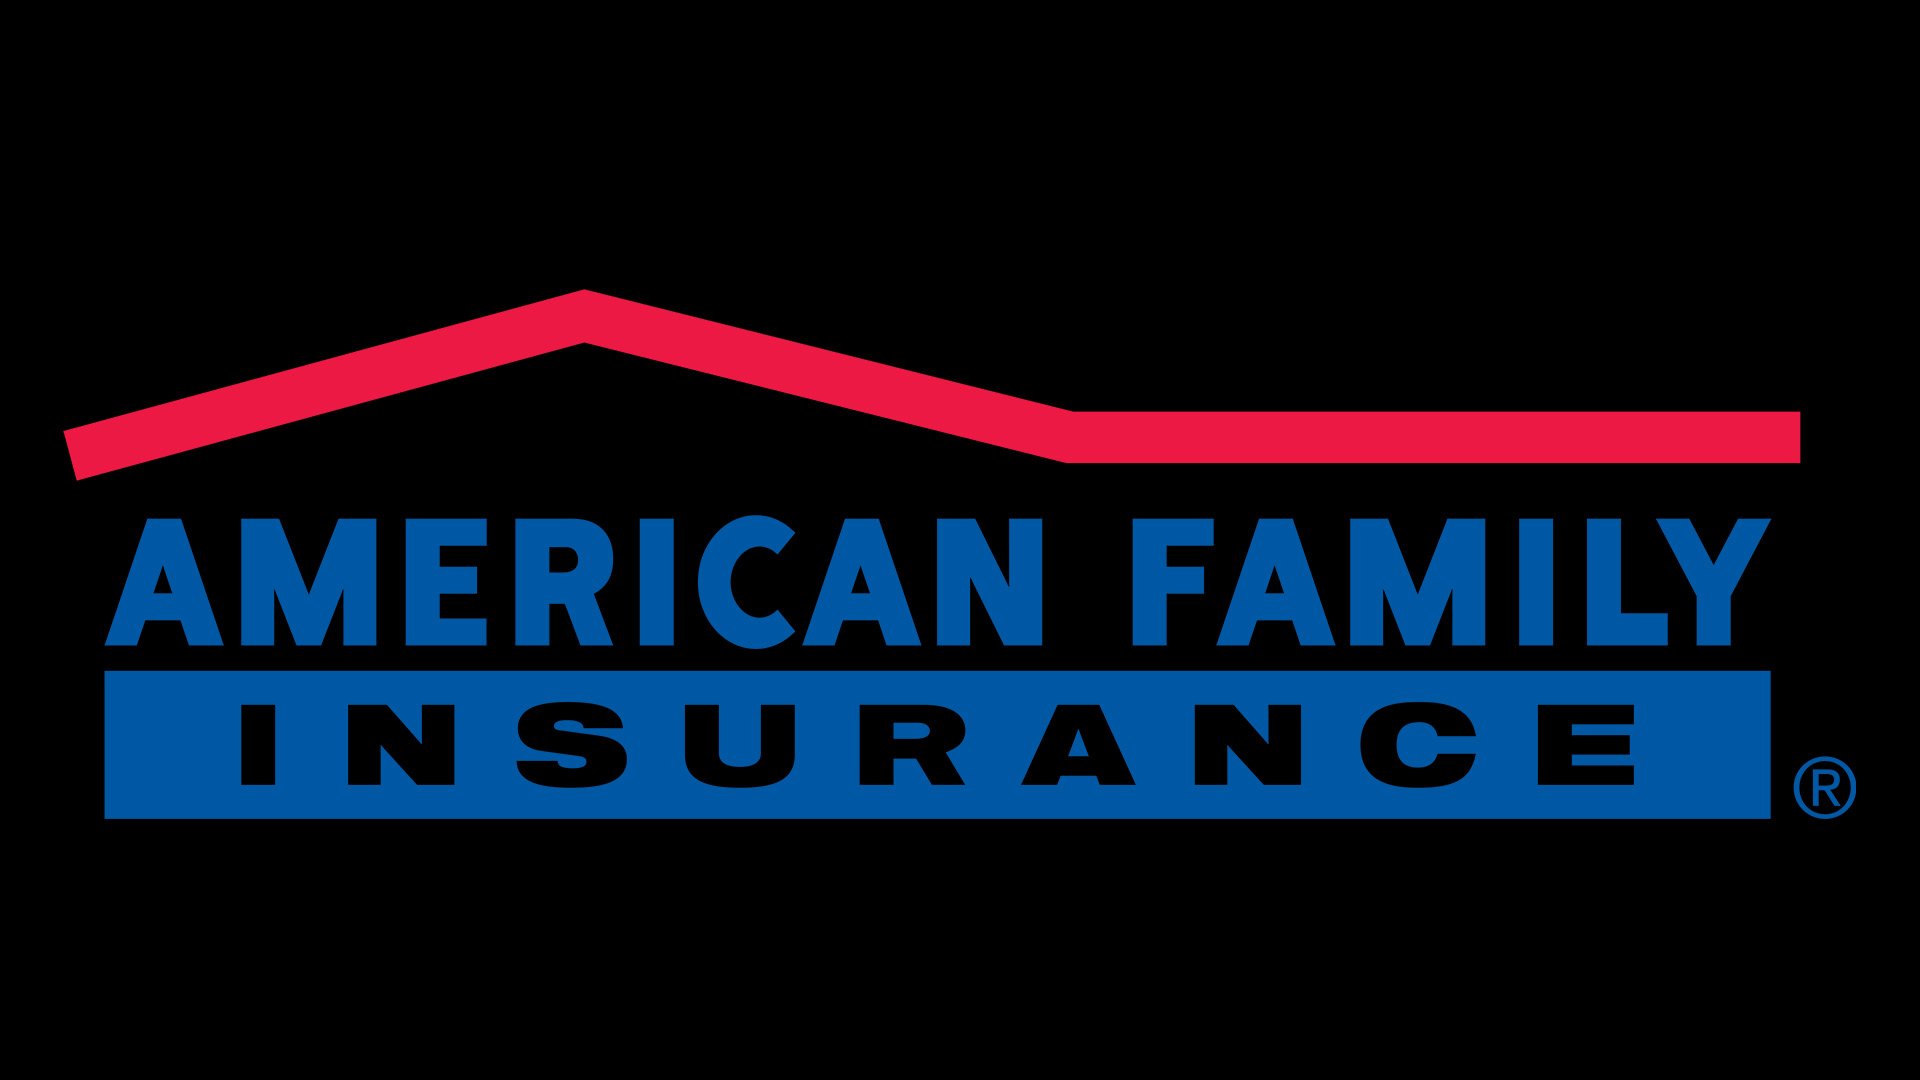 Meaning American Family Insurance logo and symbol | history and evolution